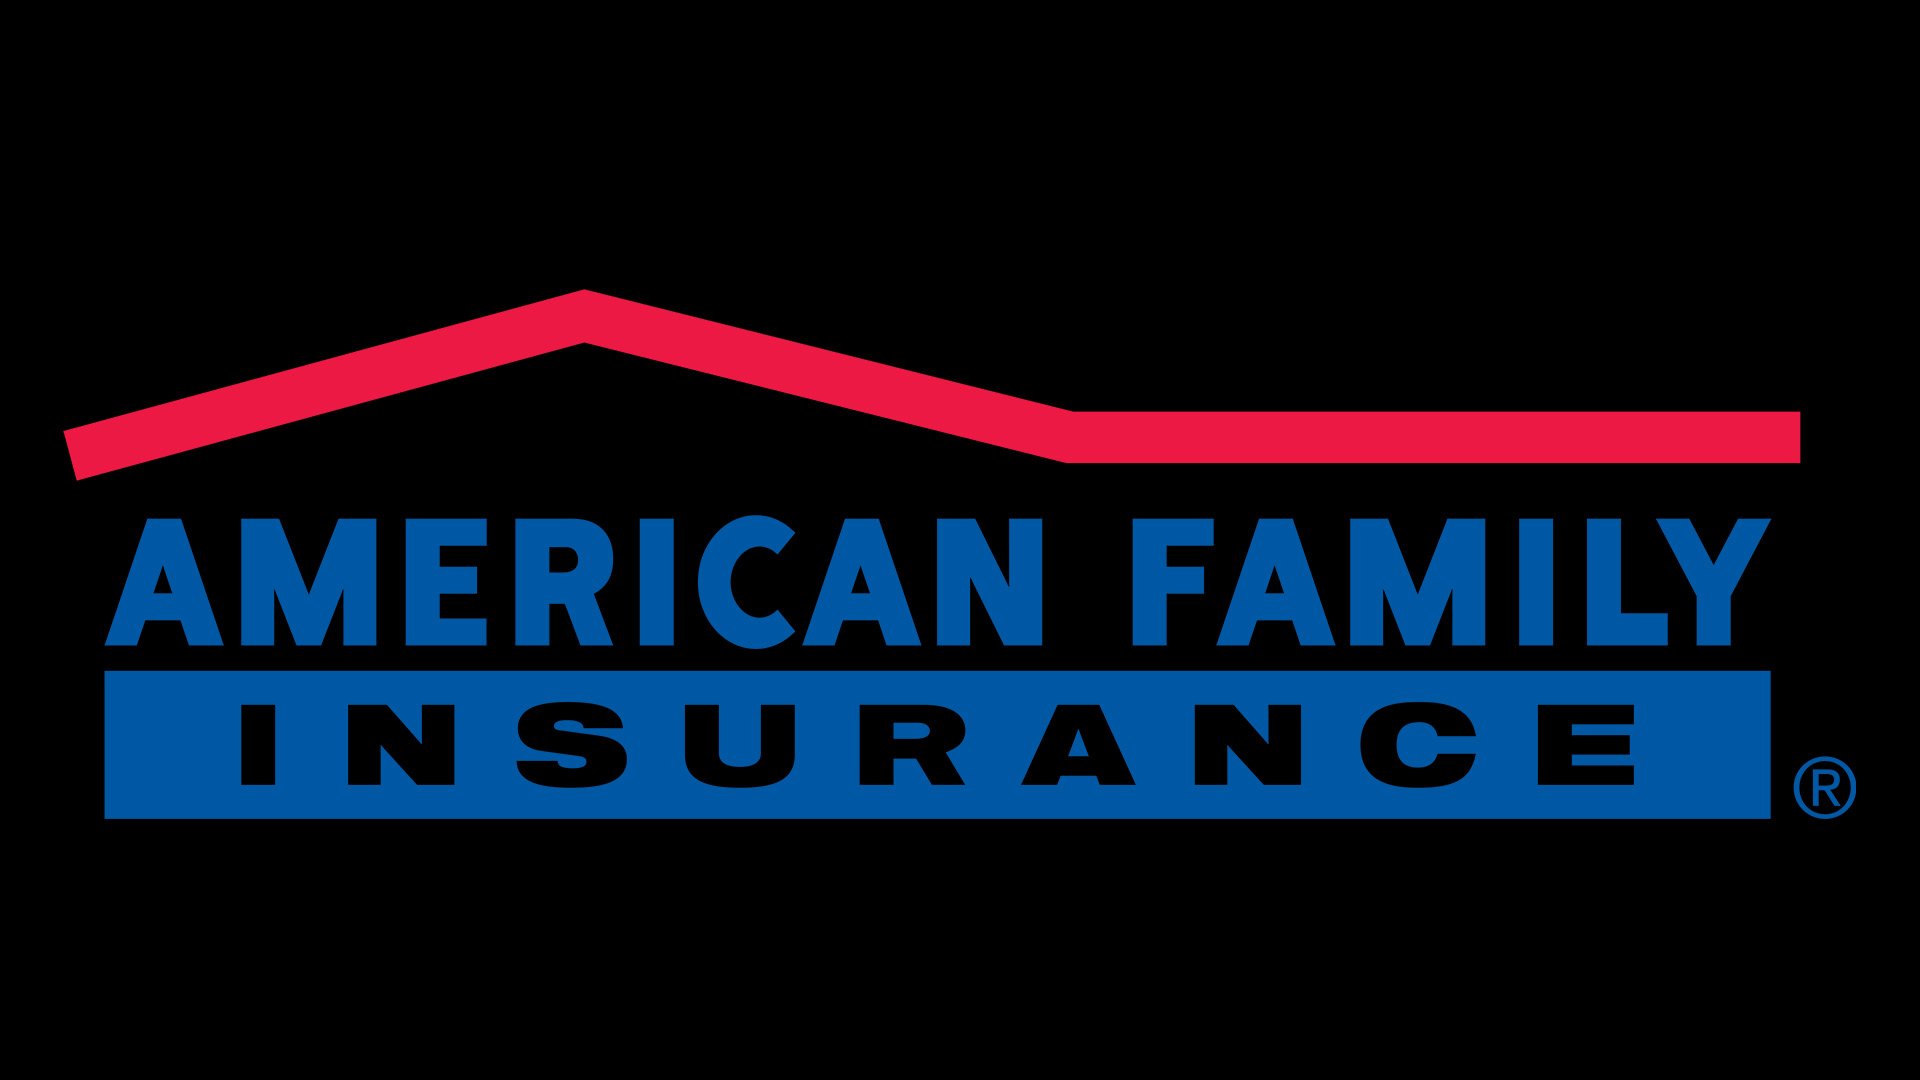 Meaning American Family Insurance logo and symbol | history and evolution